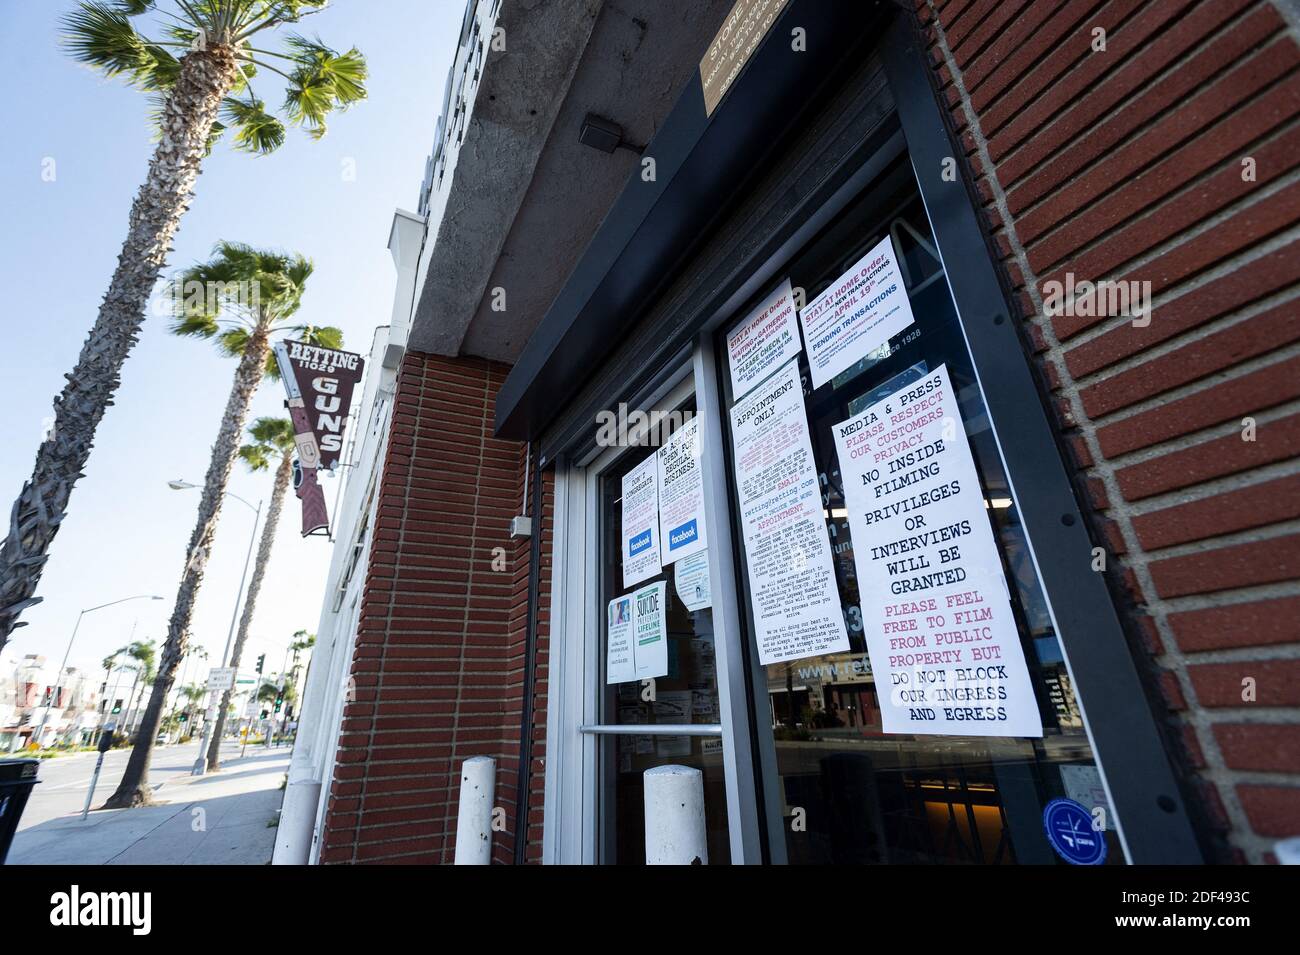 An outside view of the Martin B. Retting gun shop in Culver City, Los Angeles, CA, USA on March 26, 2020. As part of the coronavirus stay-at-home order Los Angeles County Sheriff Alex Villanueva on Tuesday said gun shops are nonessential businesses and if they donÕt close their doors, they will be cited and face the loss of their business licenses. Photo by Lionel Hahn/ABACAPRESS.COM Stock Photo